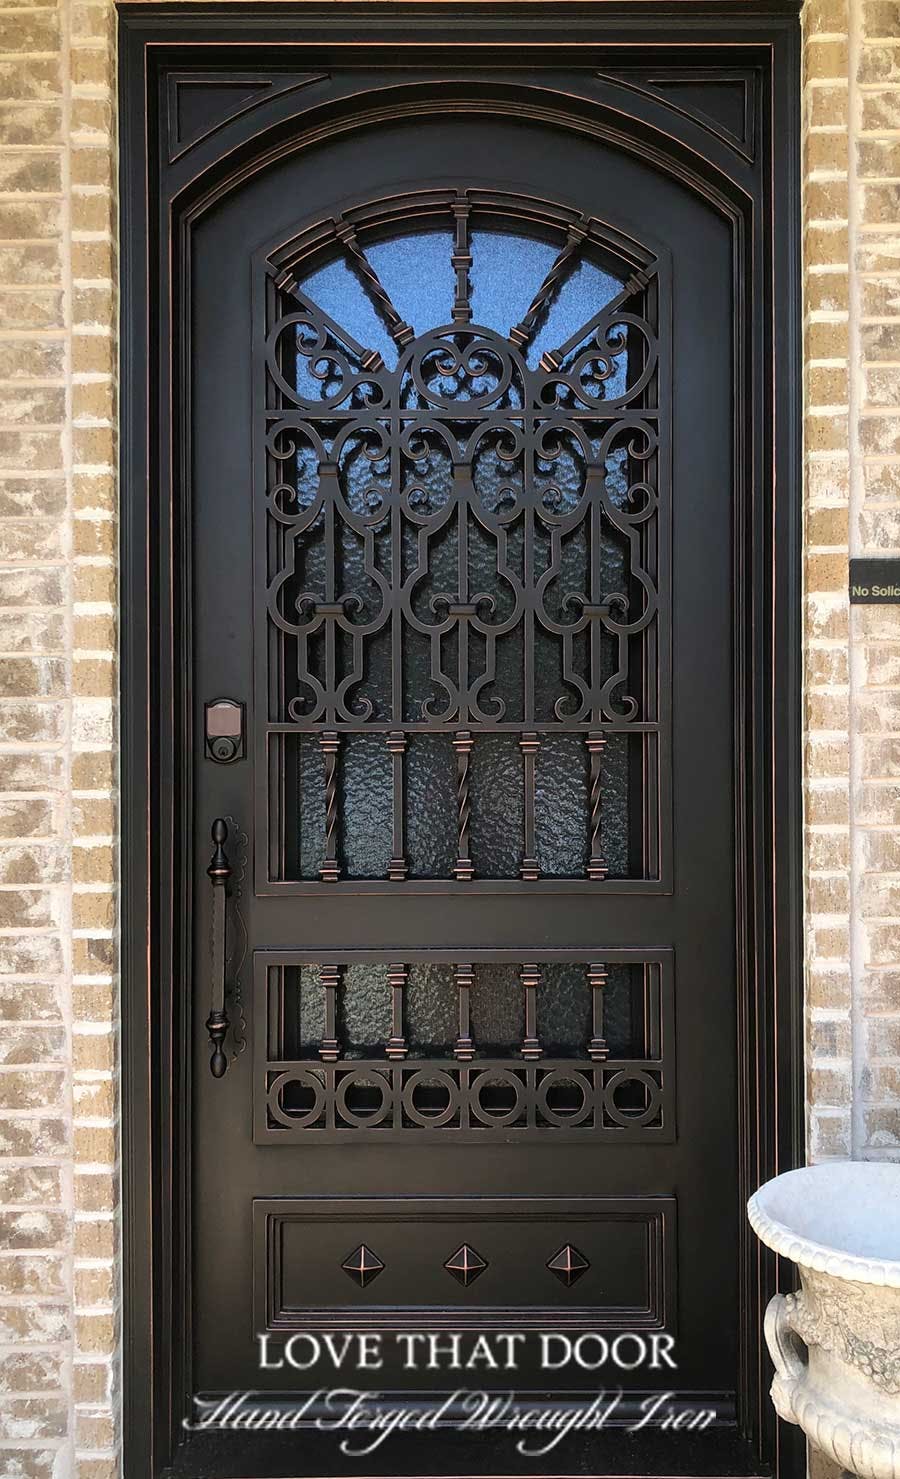 Single iron front door with decorative grillwork and patterns